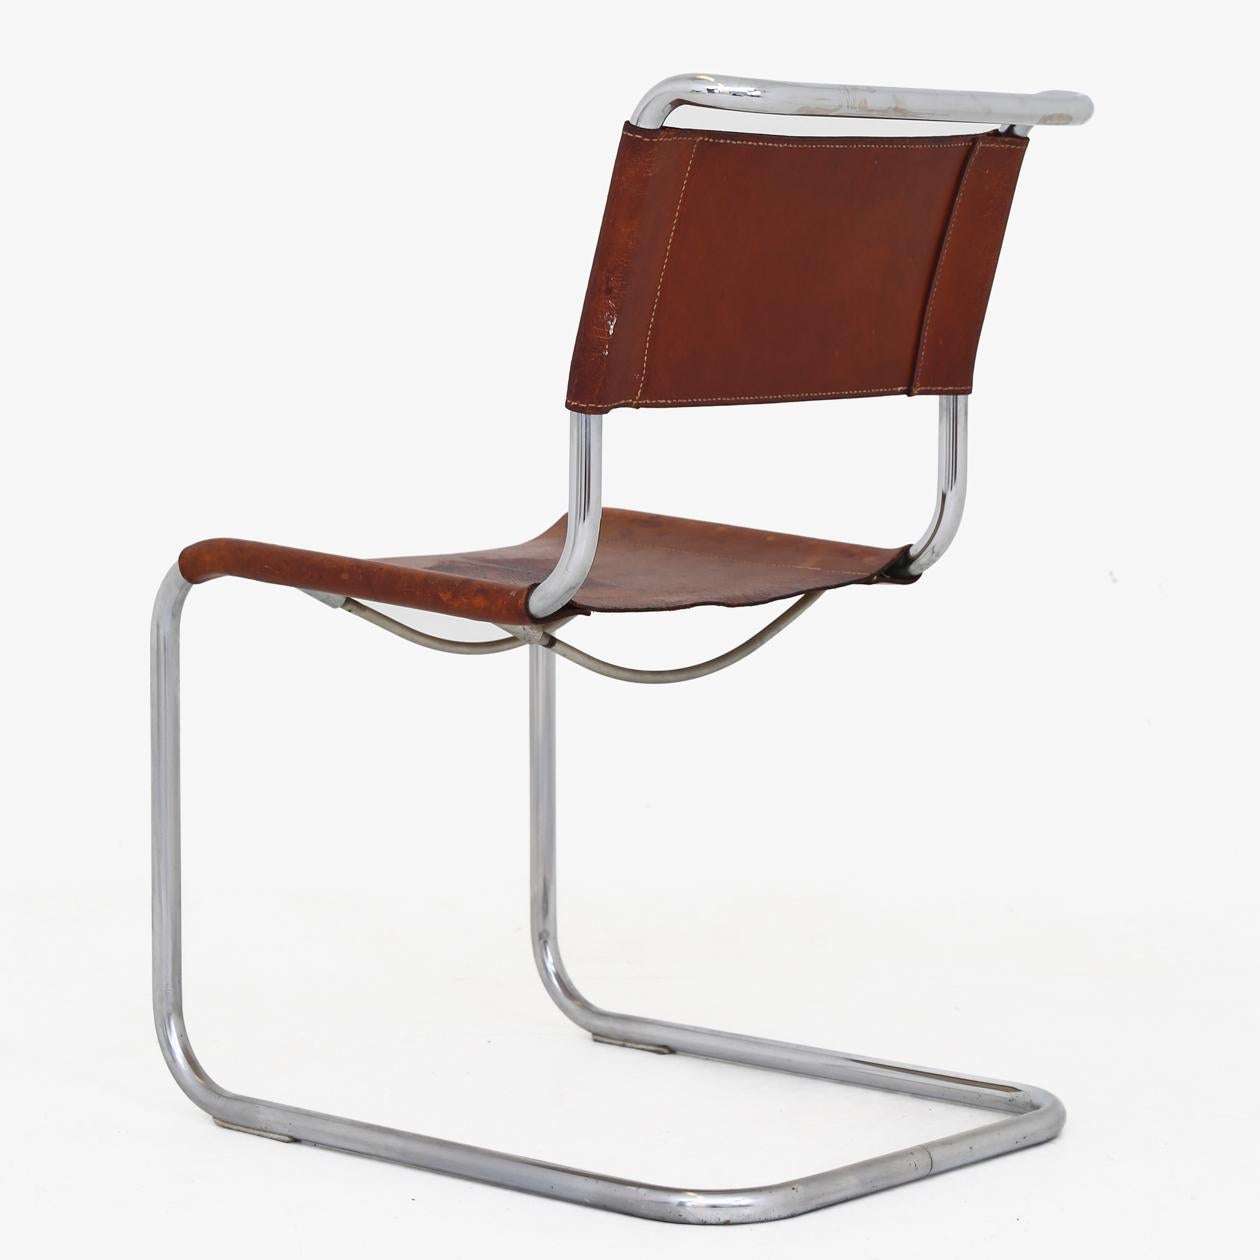 Model Bauhaus S33 - Cantilever chair in steel and patinated core leather. Marcel Breuer / Thornet